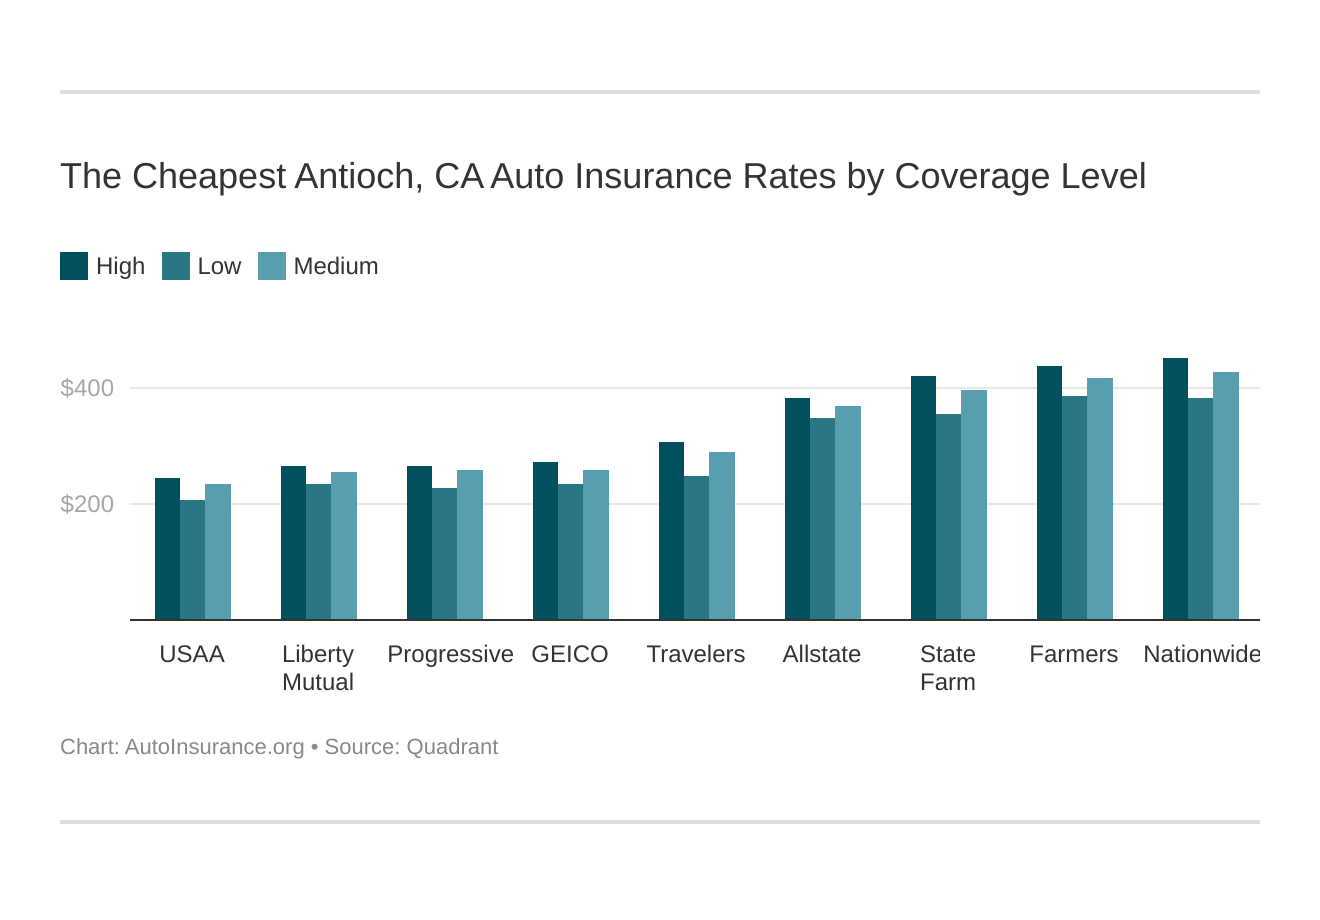 The Cheapest Antioch, CA Auto Insurance Rates by Coverage Level